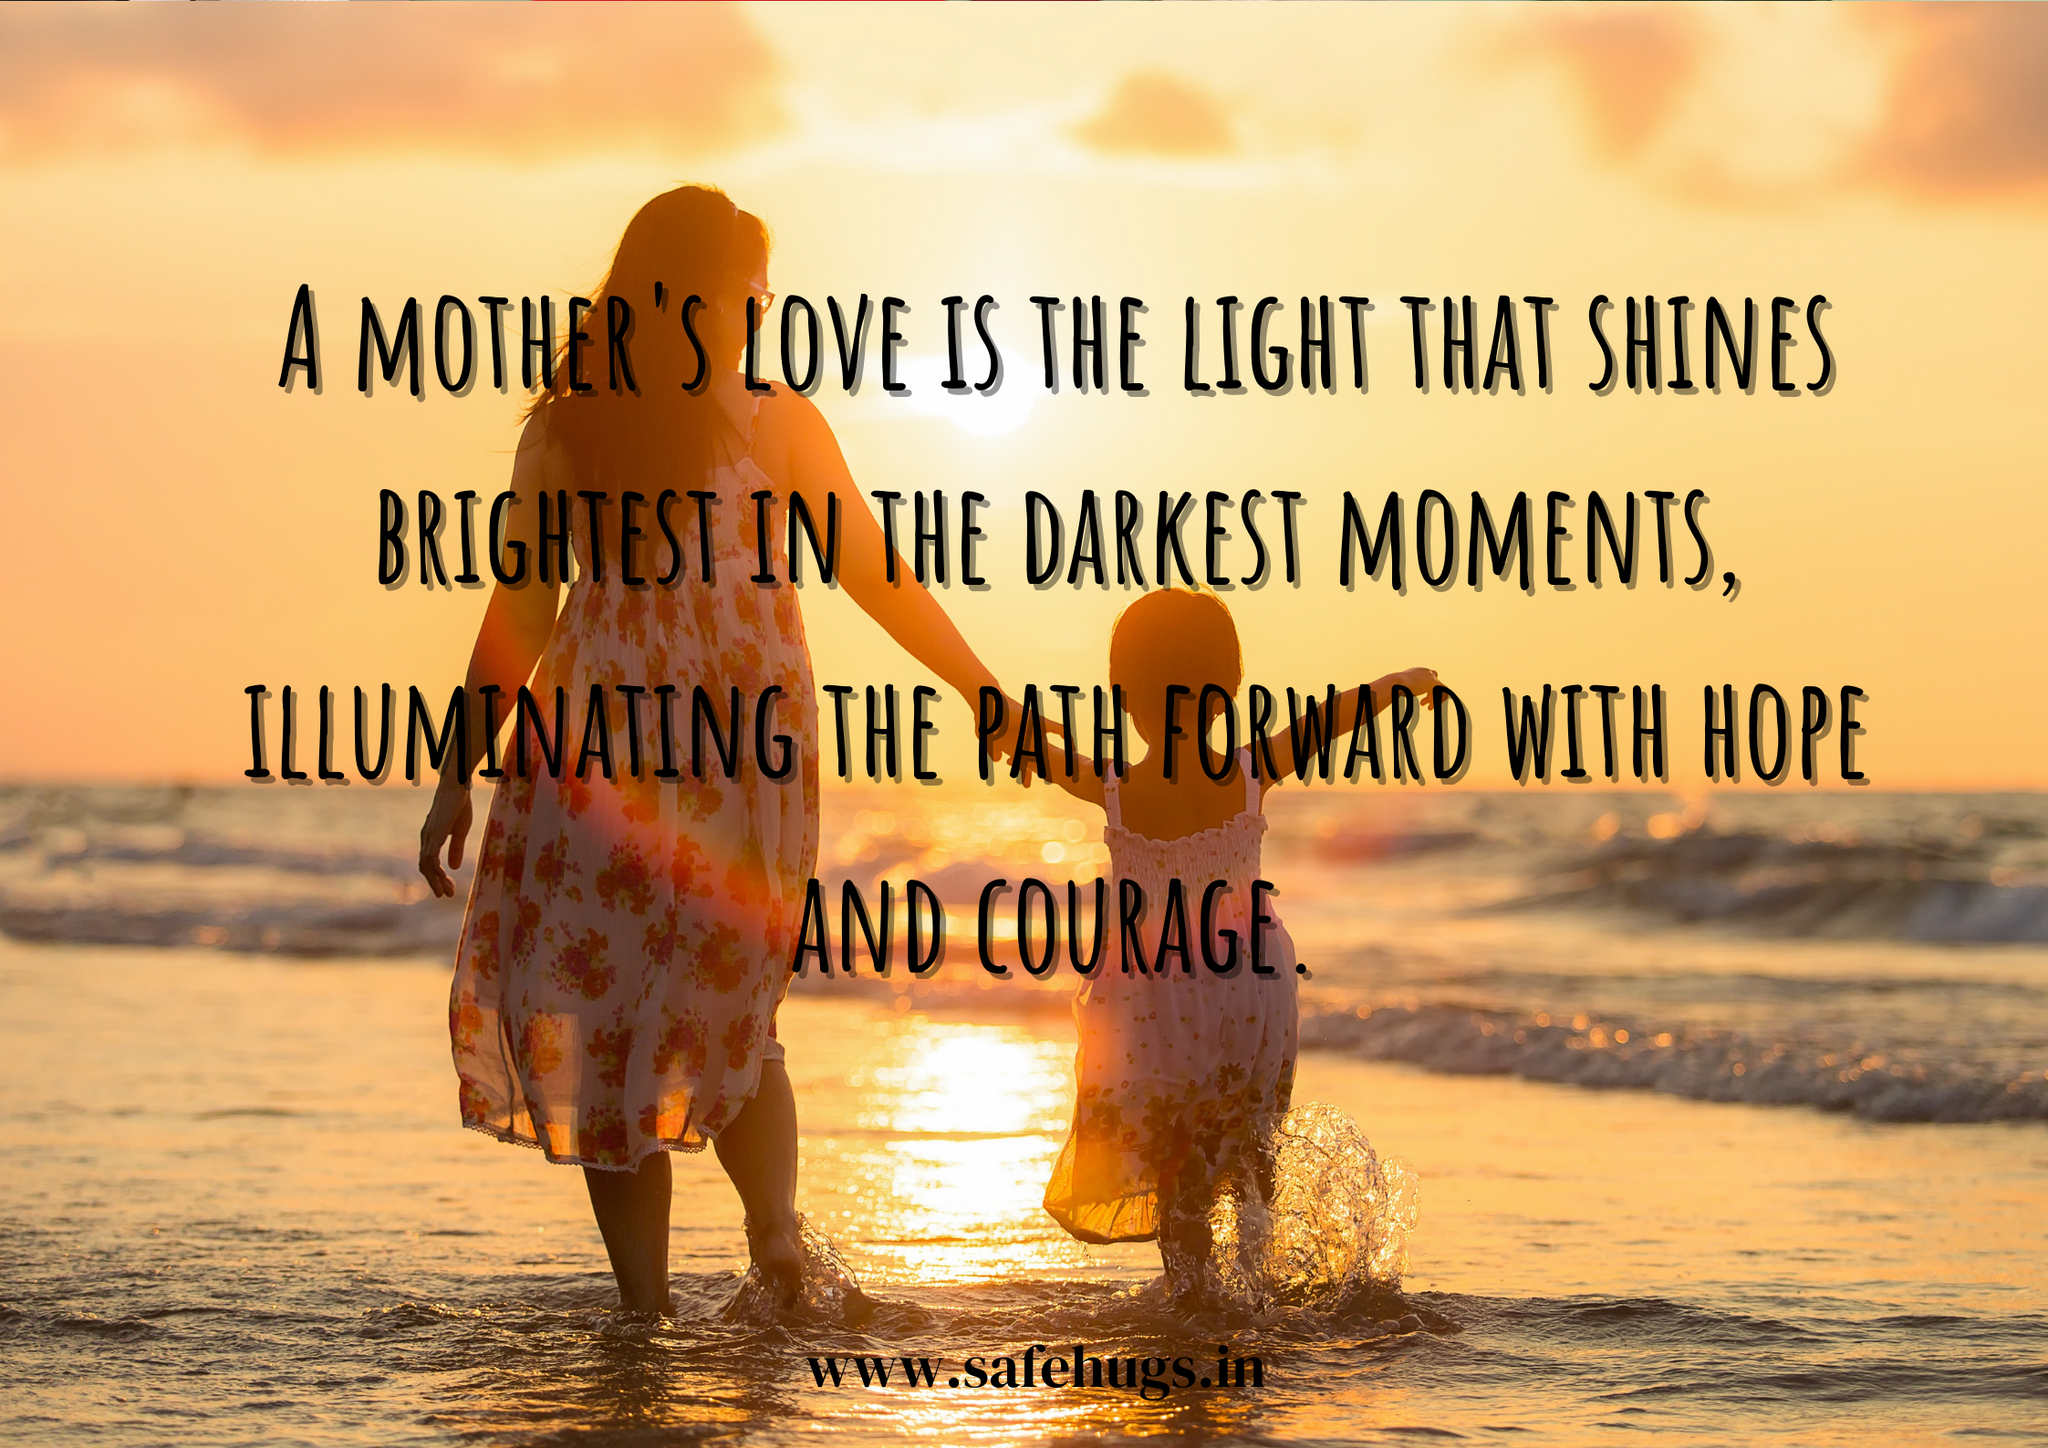 Quote: 'A mother's love is the light that shines brightest in the darkest moments, illuminating the path forward with hope and courage.'